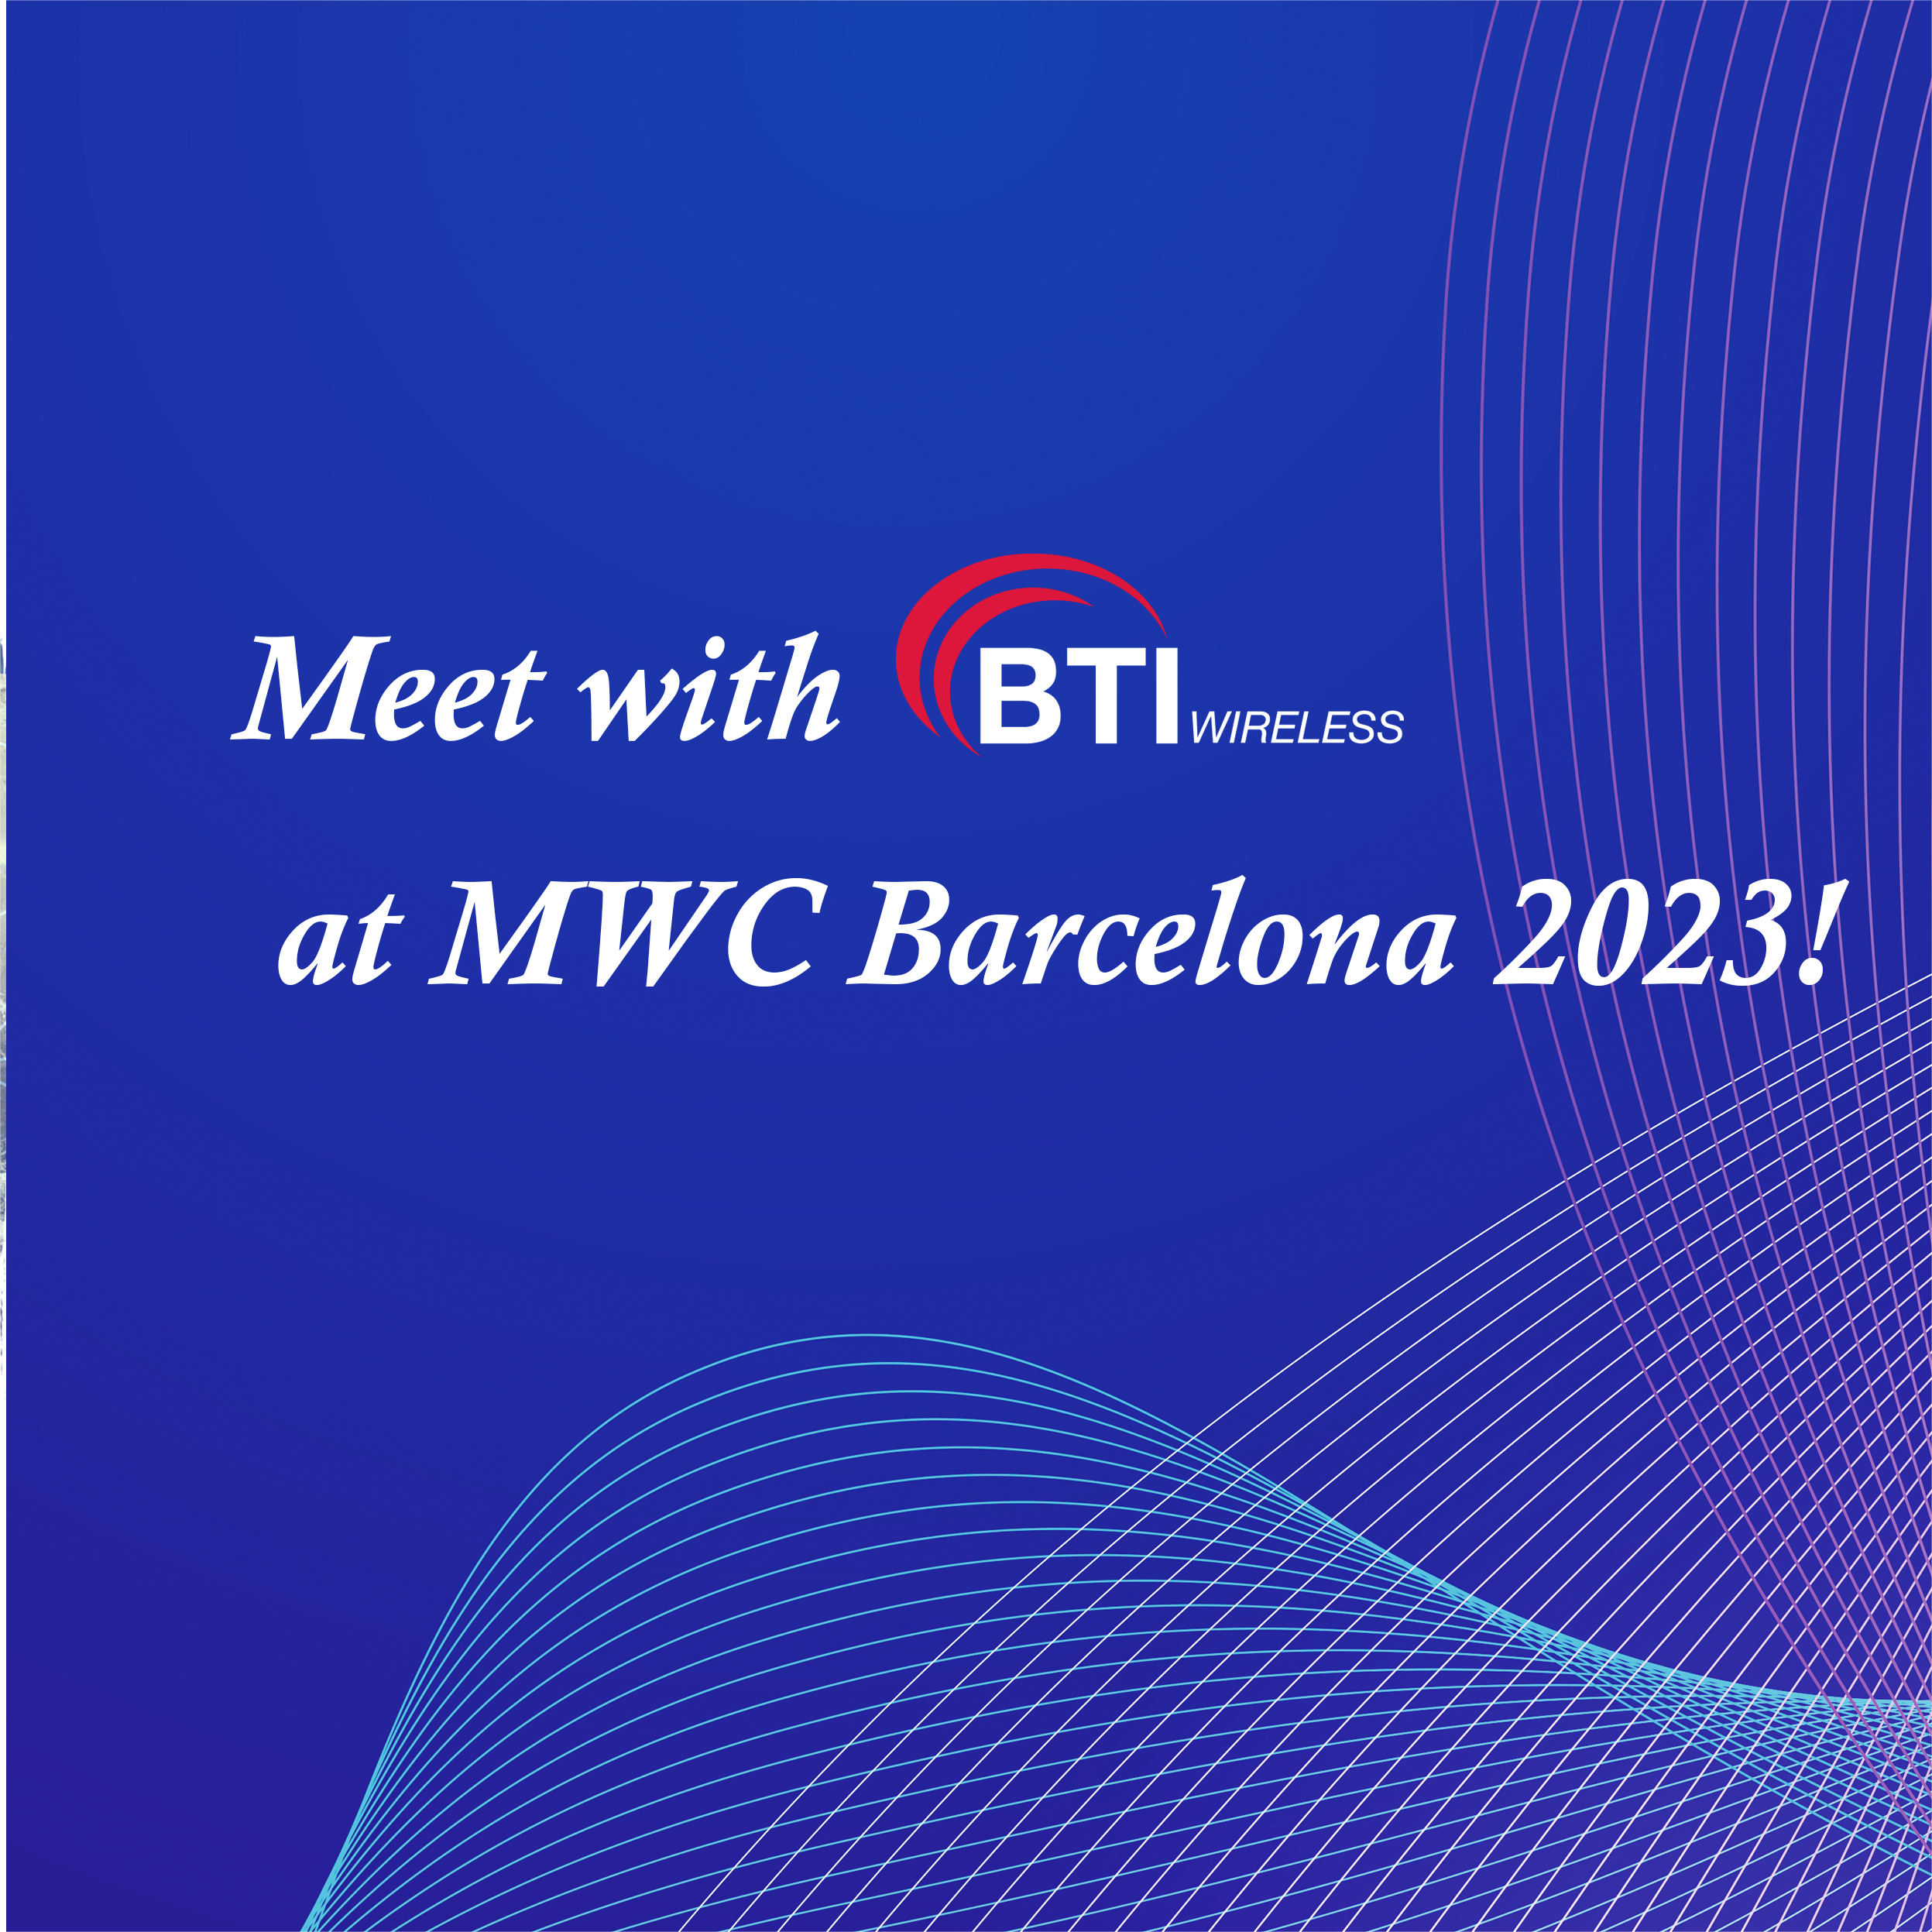 Meet with BTI Wireless at MWC Barcelona 2023!